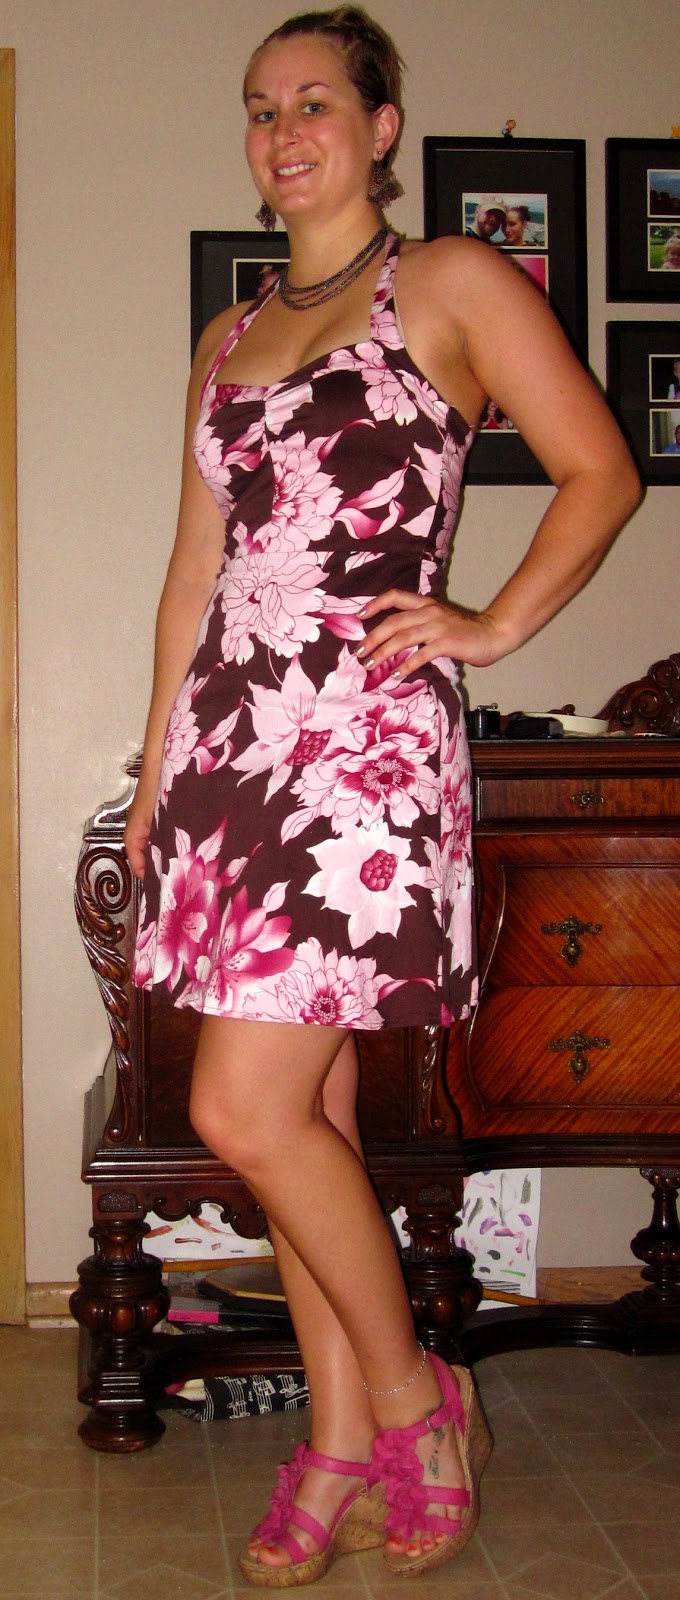 Low-Budget Fashionista: Floral Dress - Simple Outfit